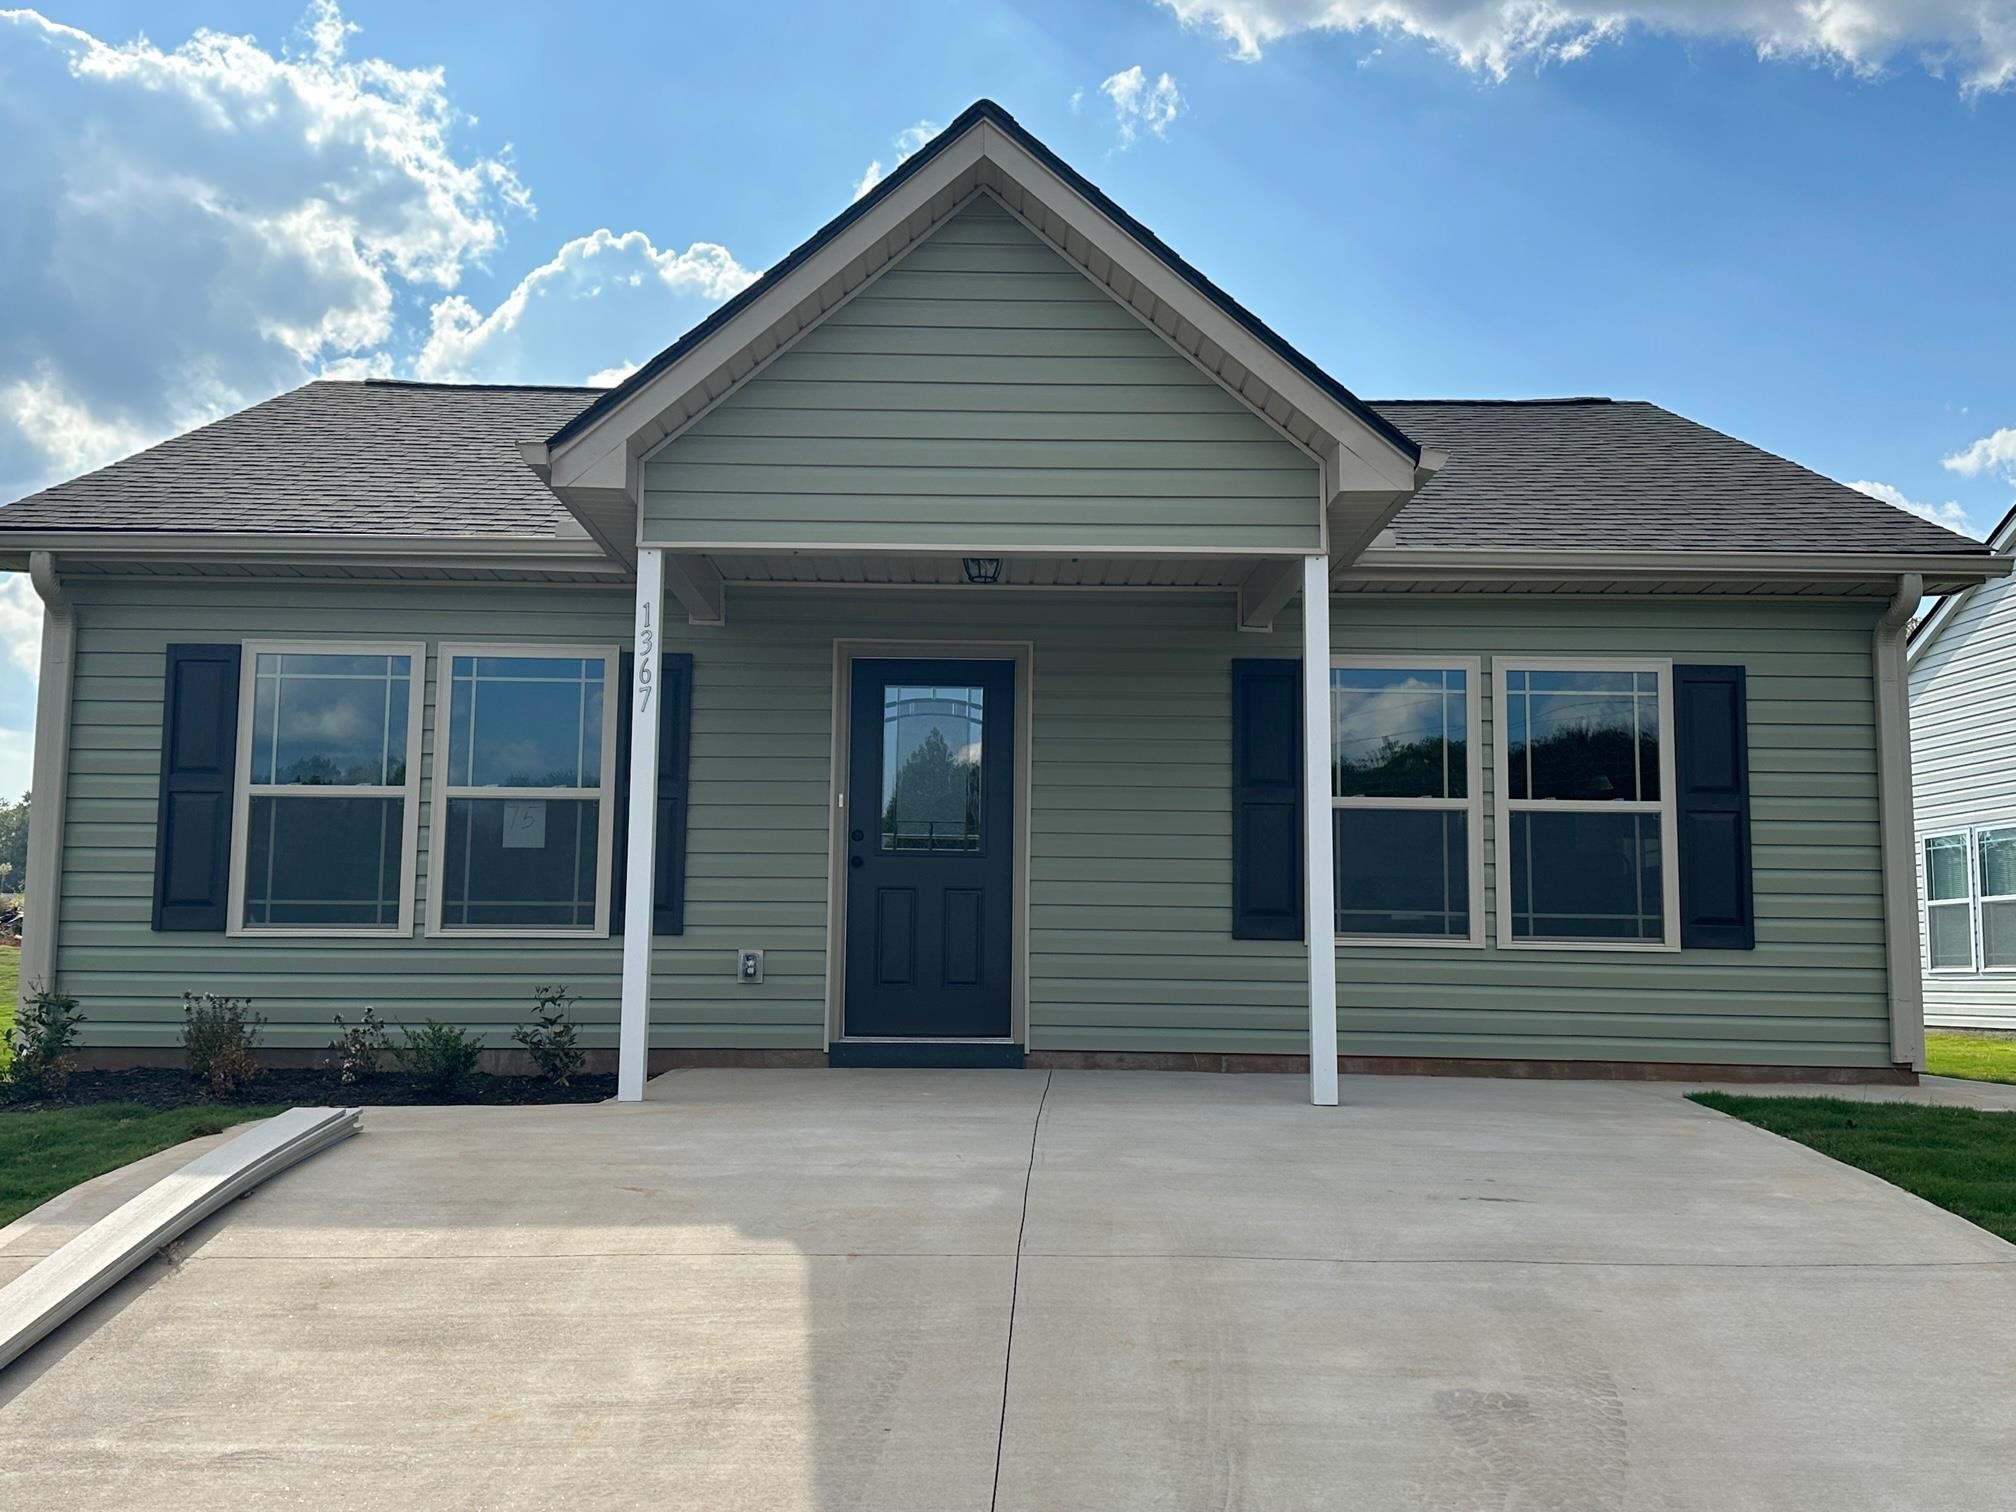 Welcome to Gentry Place! The Saluda floor plan is a 2 bedroom, 2 bathroom home. Standard features include trey ceiling with rope lighting in the master bedroom, vinyl plank flooring, and much more! New community that is conveniently located in Spartanburg, just minutes from anything you need! Call today for more info!